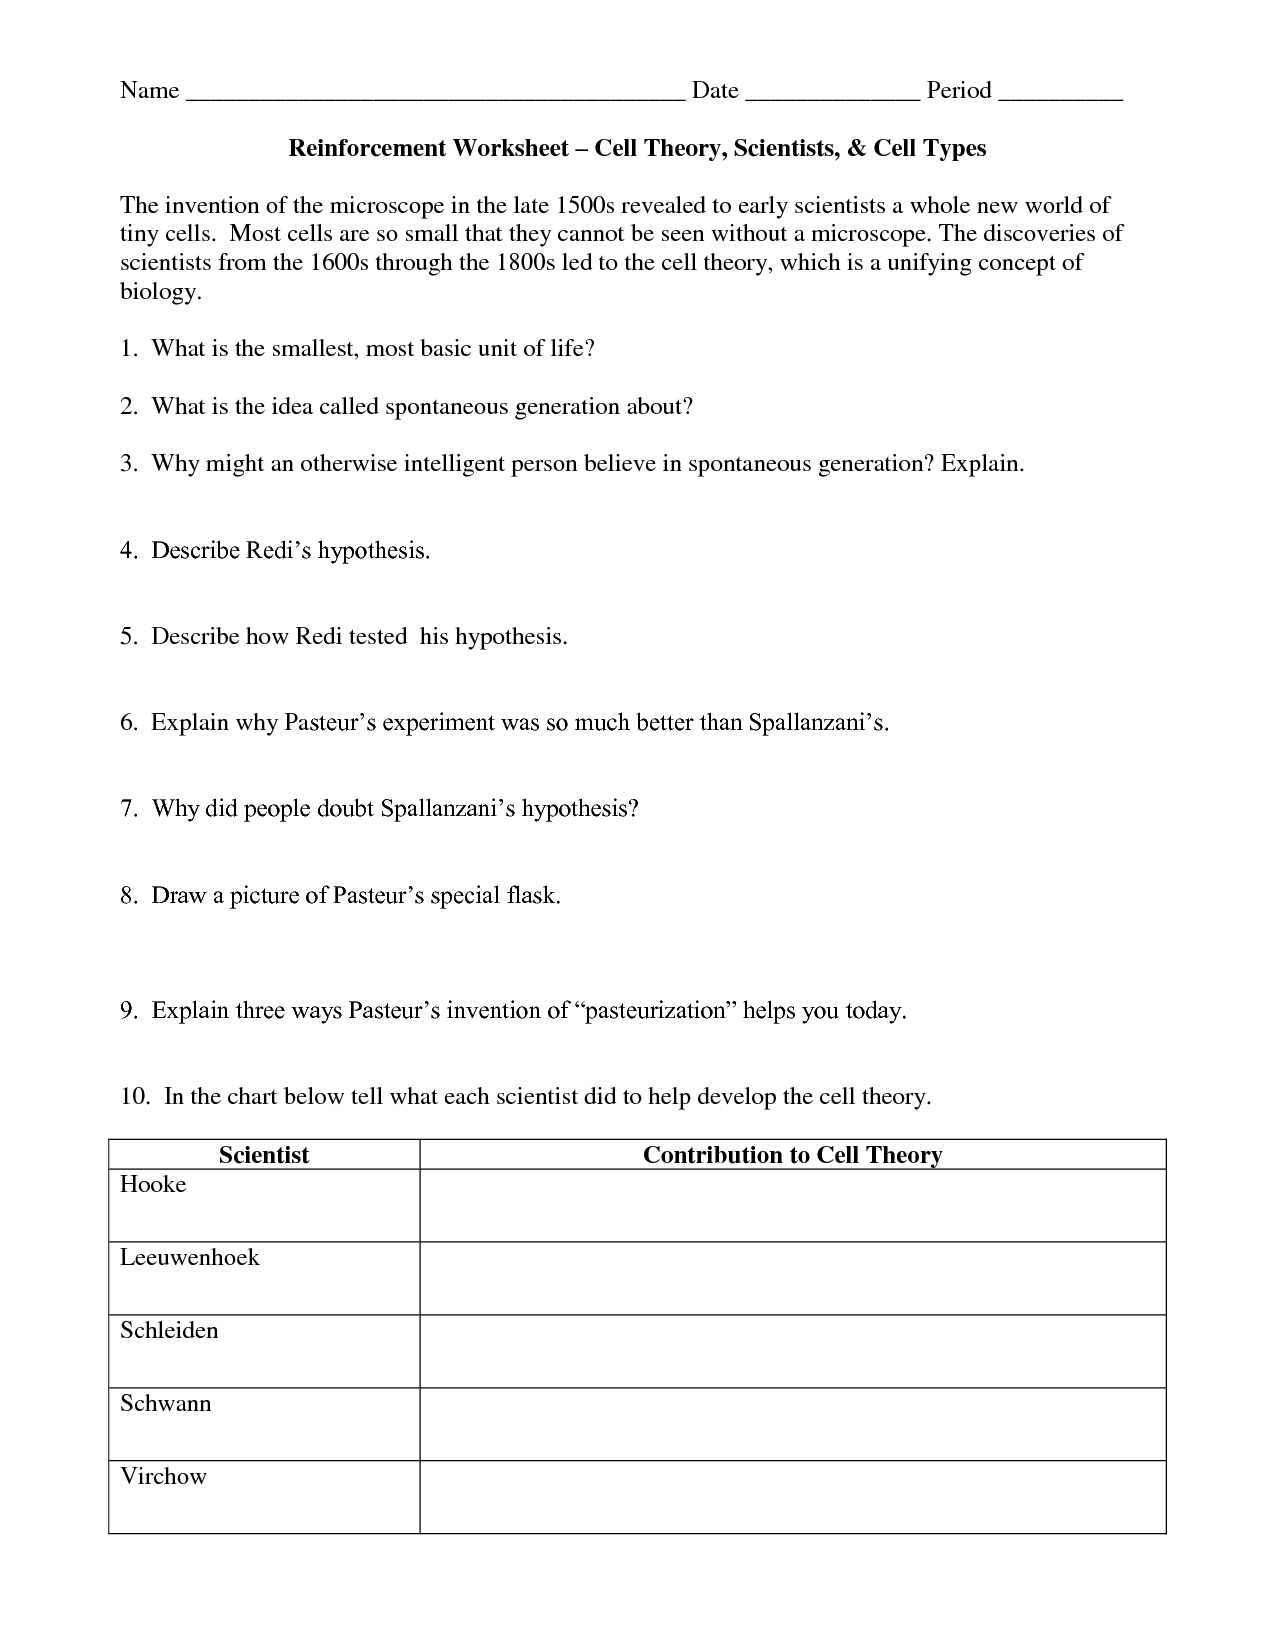 15 Best Images of Cell Theory Worksheet Answers Prokaryotic and